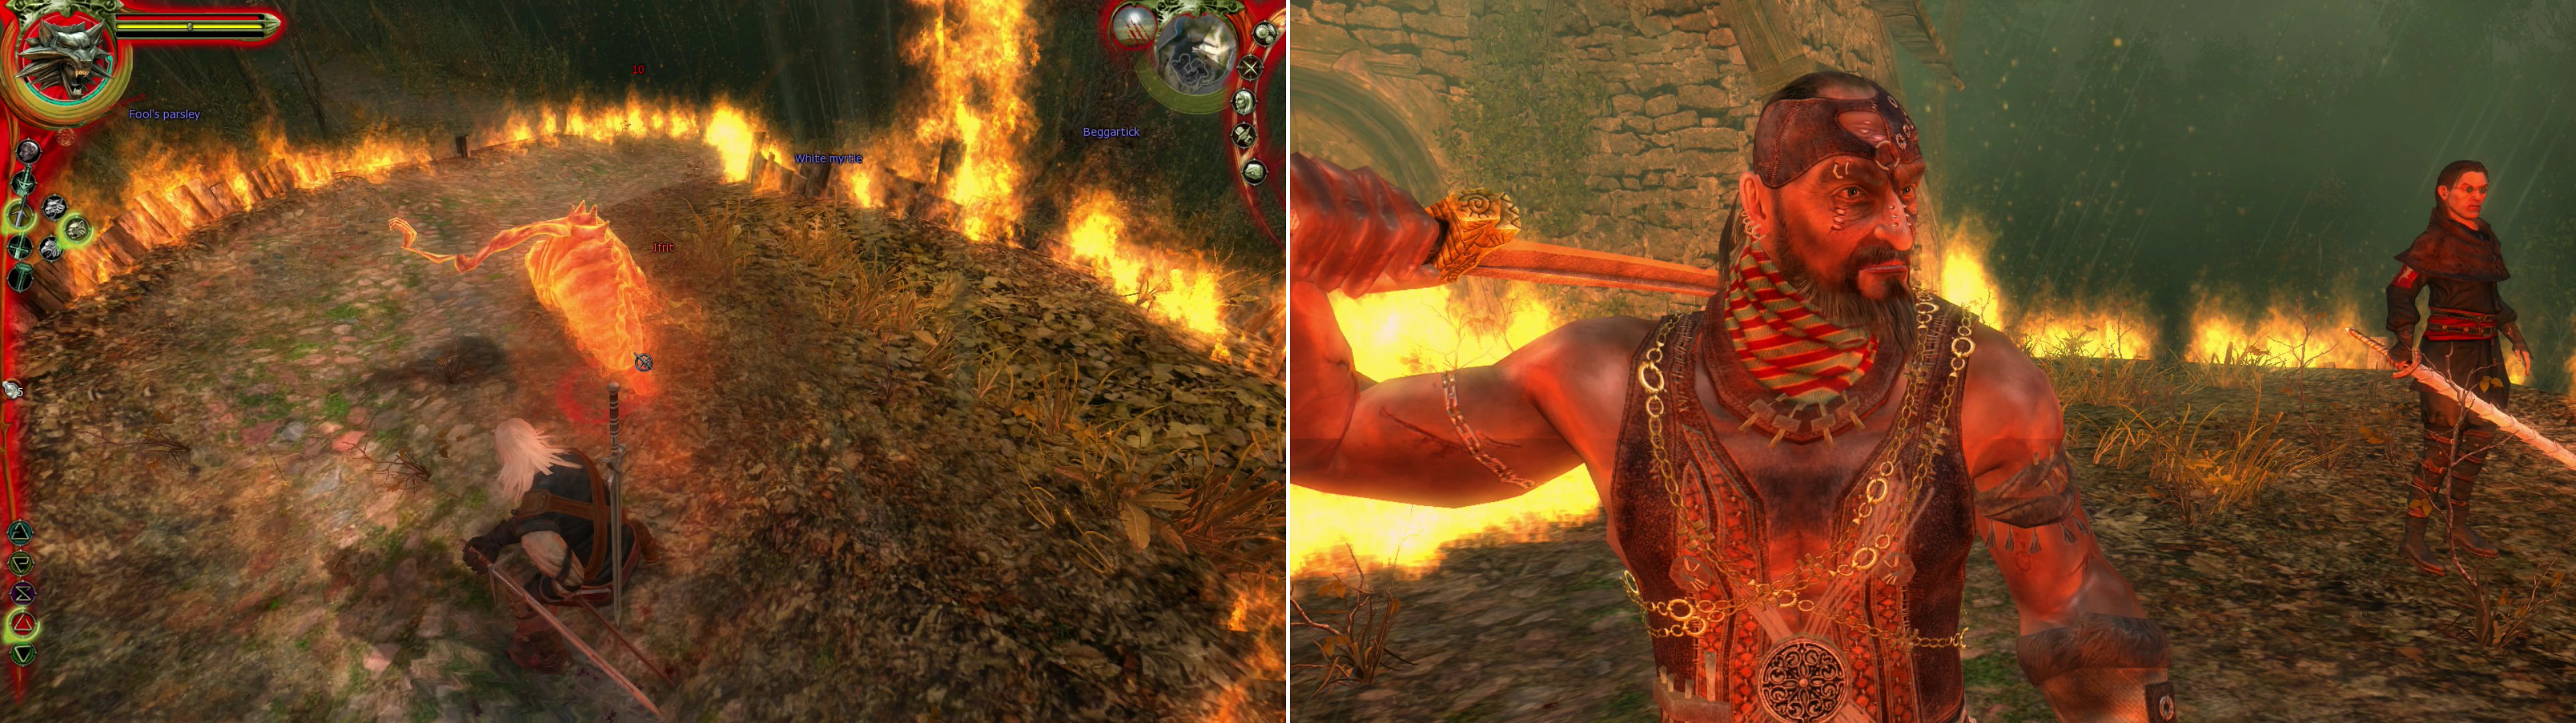 After getting the drop on Azar, he'll summon an Ifrit (left). This is merely a delay, however, buying him time until he can create a portal through which the Professor joins the fray (right).